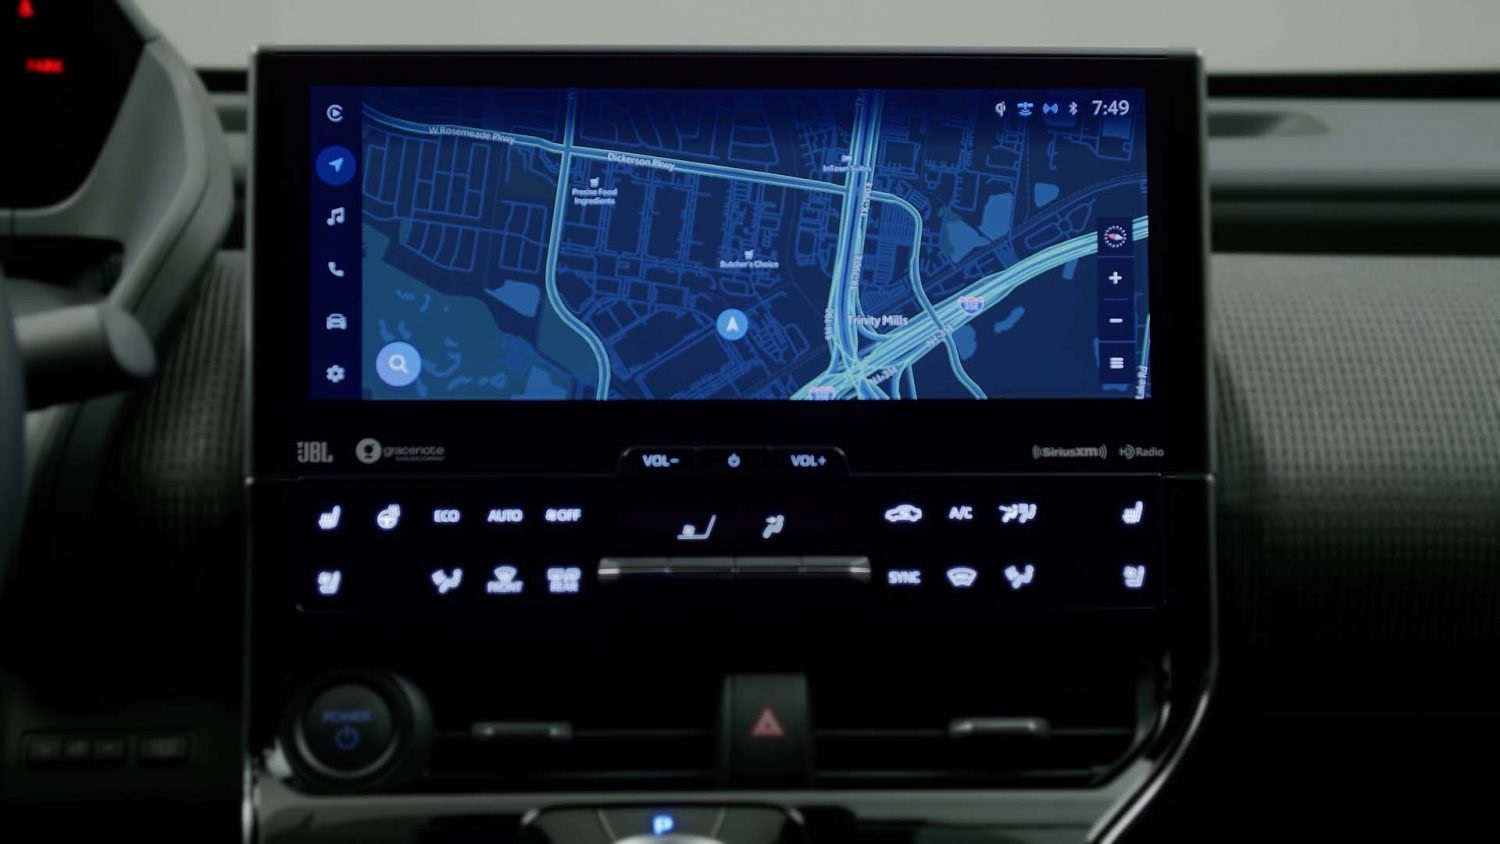 A digital screen shows navigation routes.